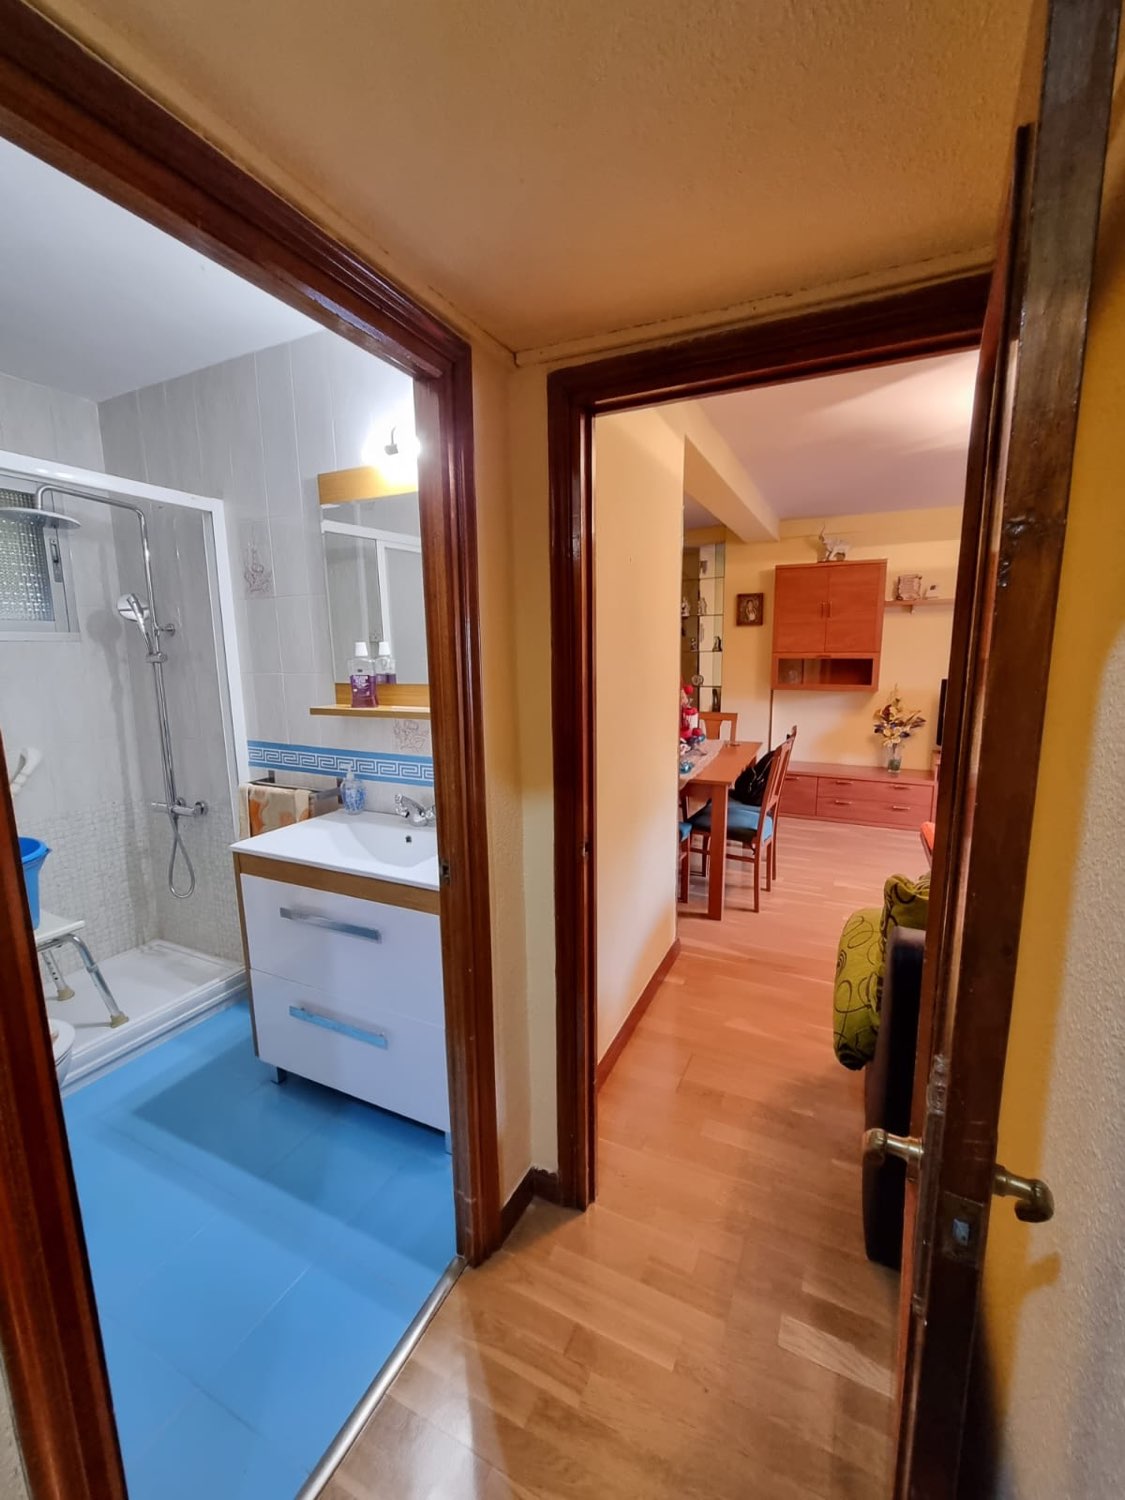 Flat for sale in Entrevías (Madrid)